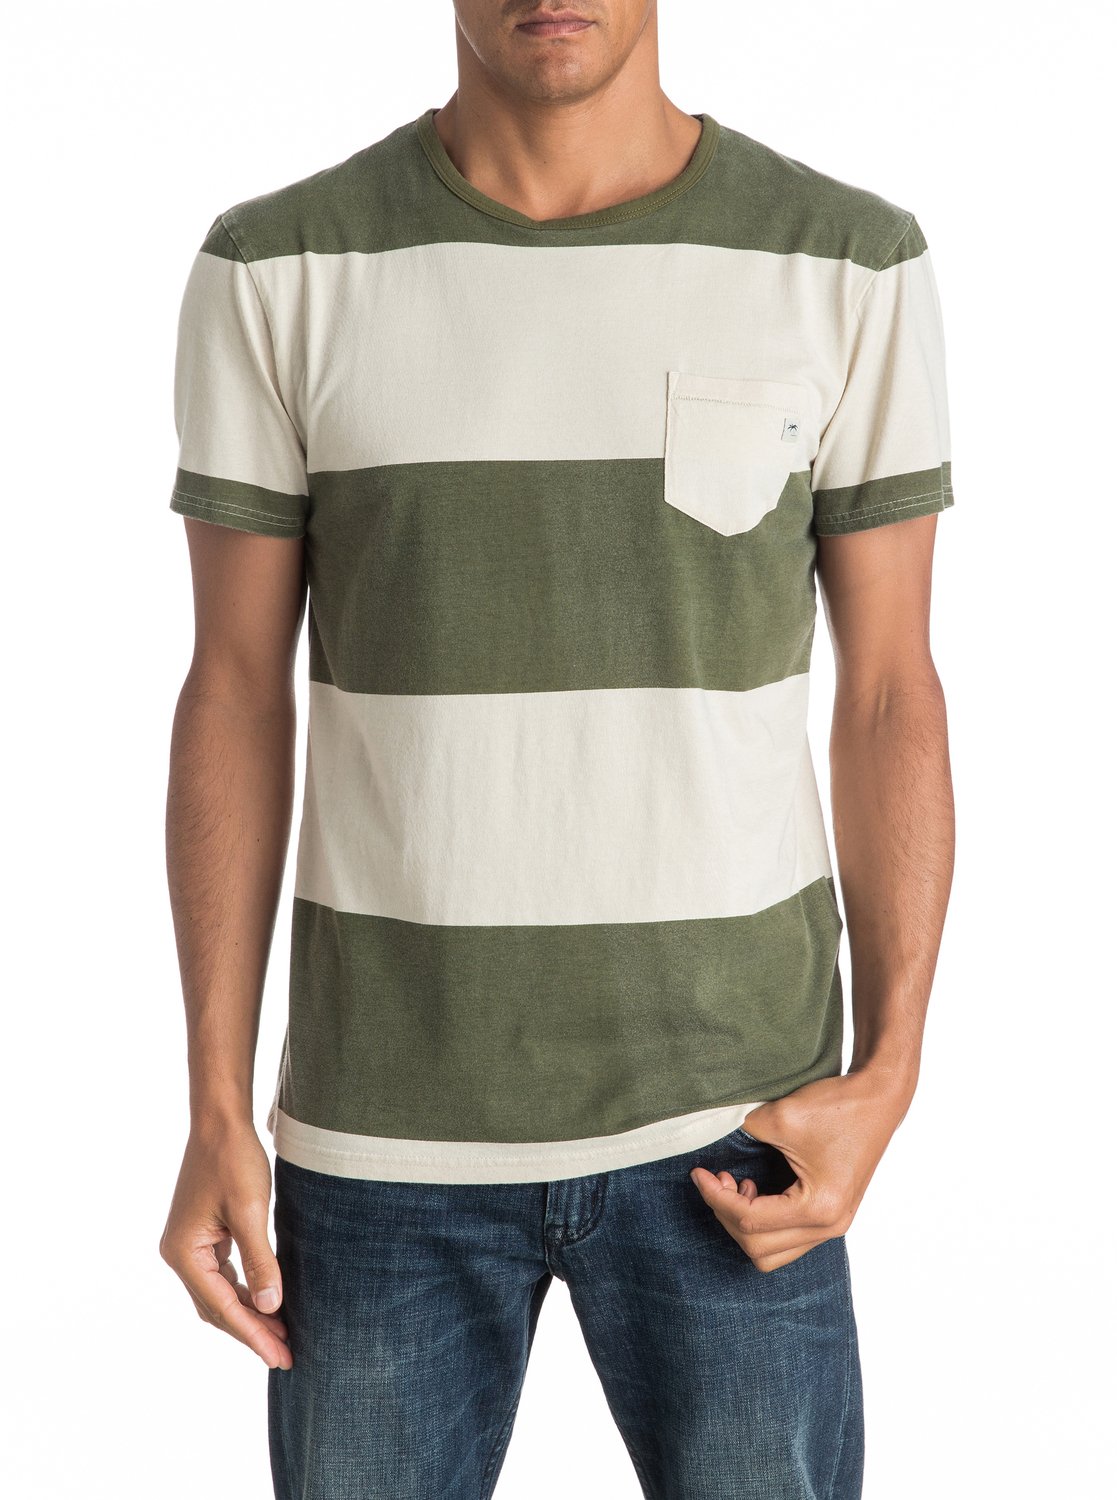 Maxed Out Hero - Tee-Shirt a poche pour Homme - Quiksilver